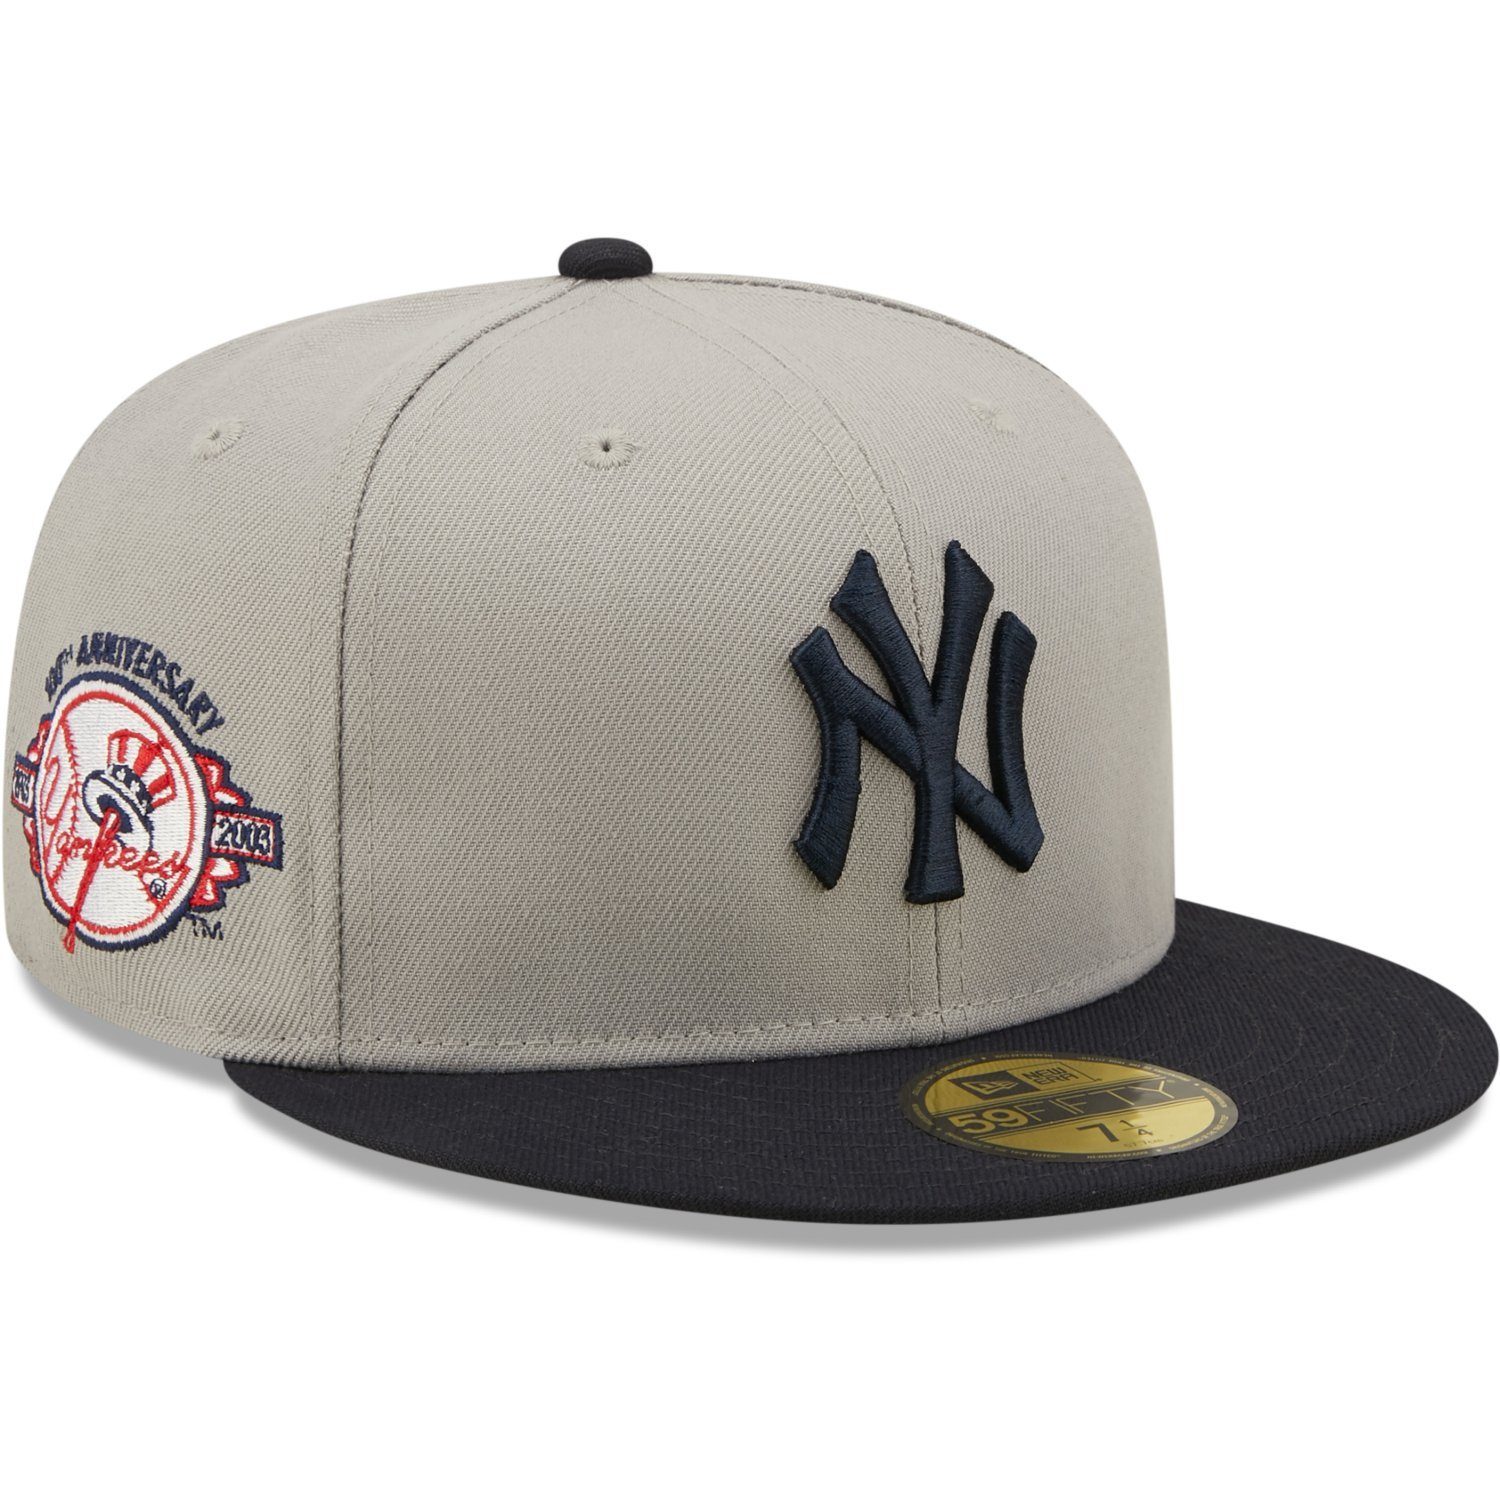 New Era Fitted Cap PATCH York 59Fifty New Yankees SIDE